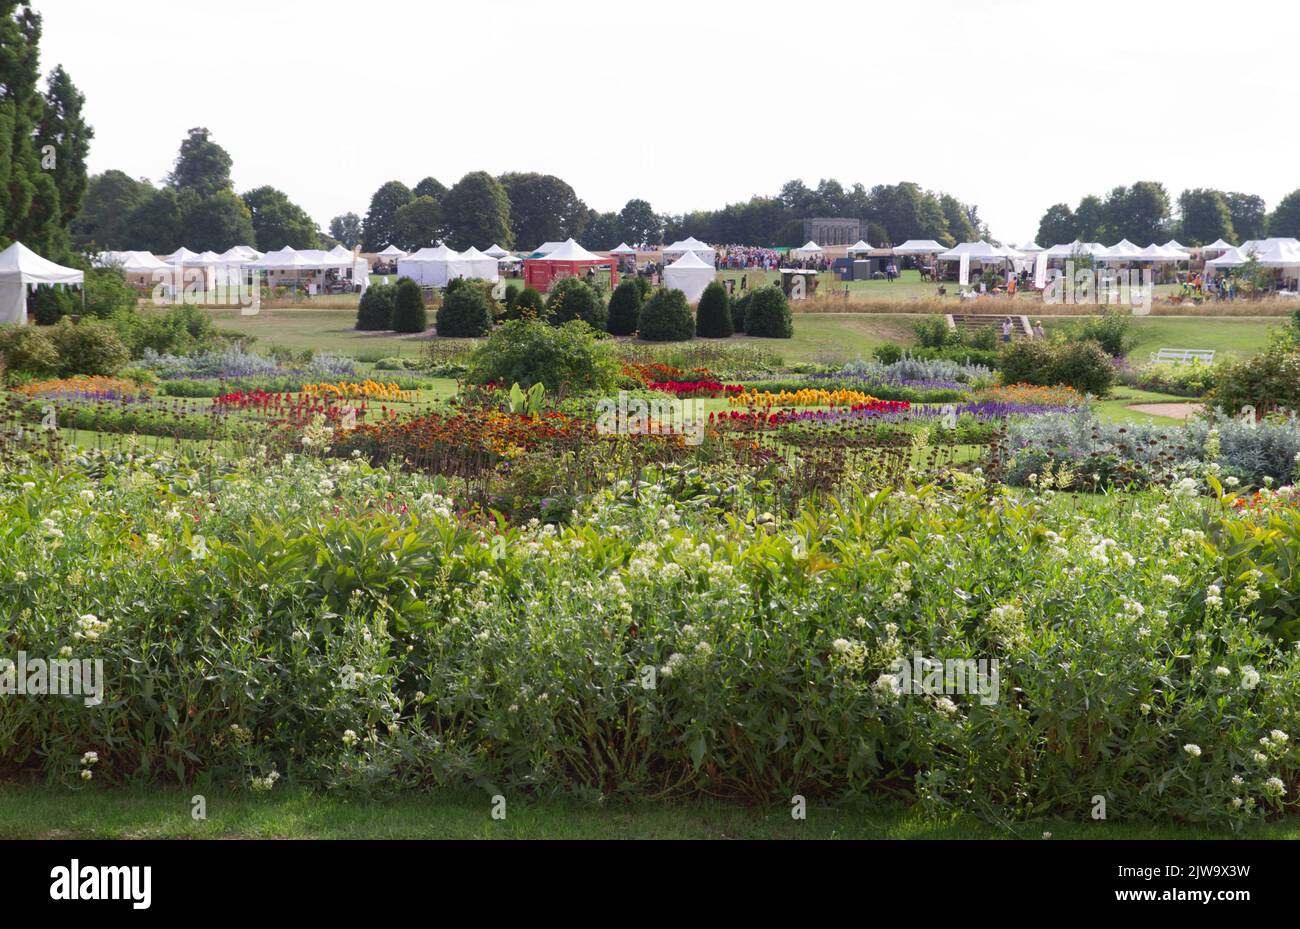 View overlooking the Parterre garden to the trade stands beyond at the inaugural Gardeners World Autumn Fair 2022 held at Audley End in Essex. Stock Photo